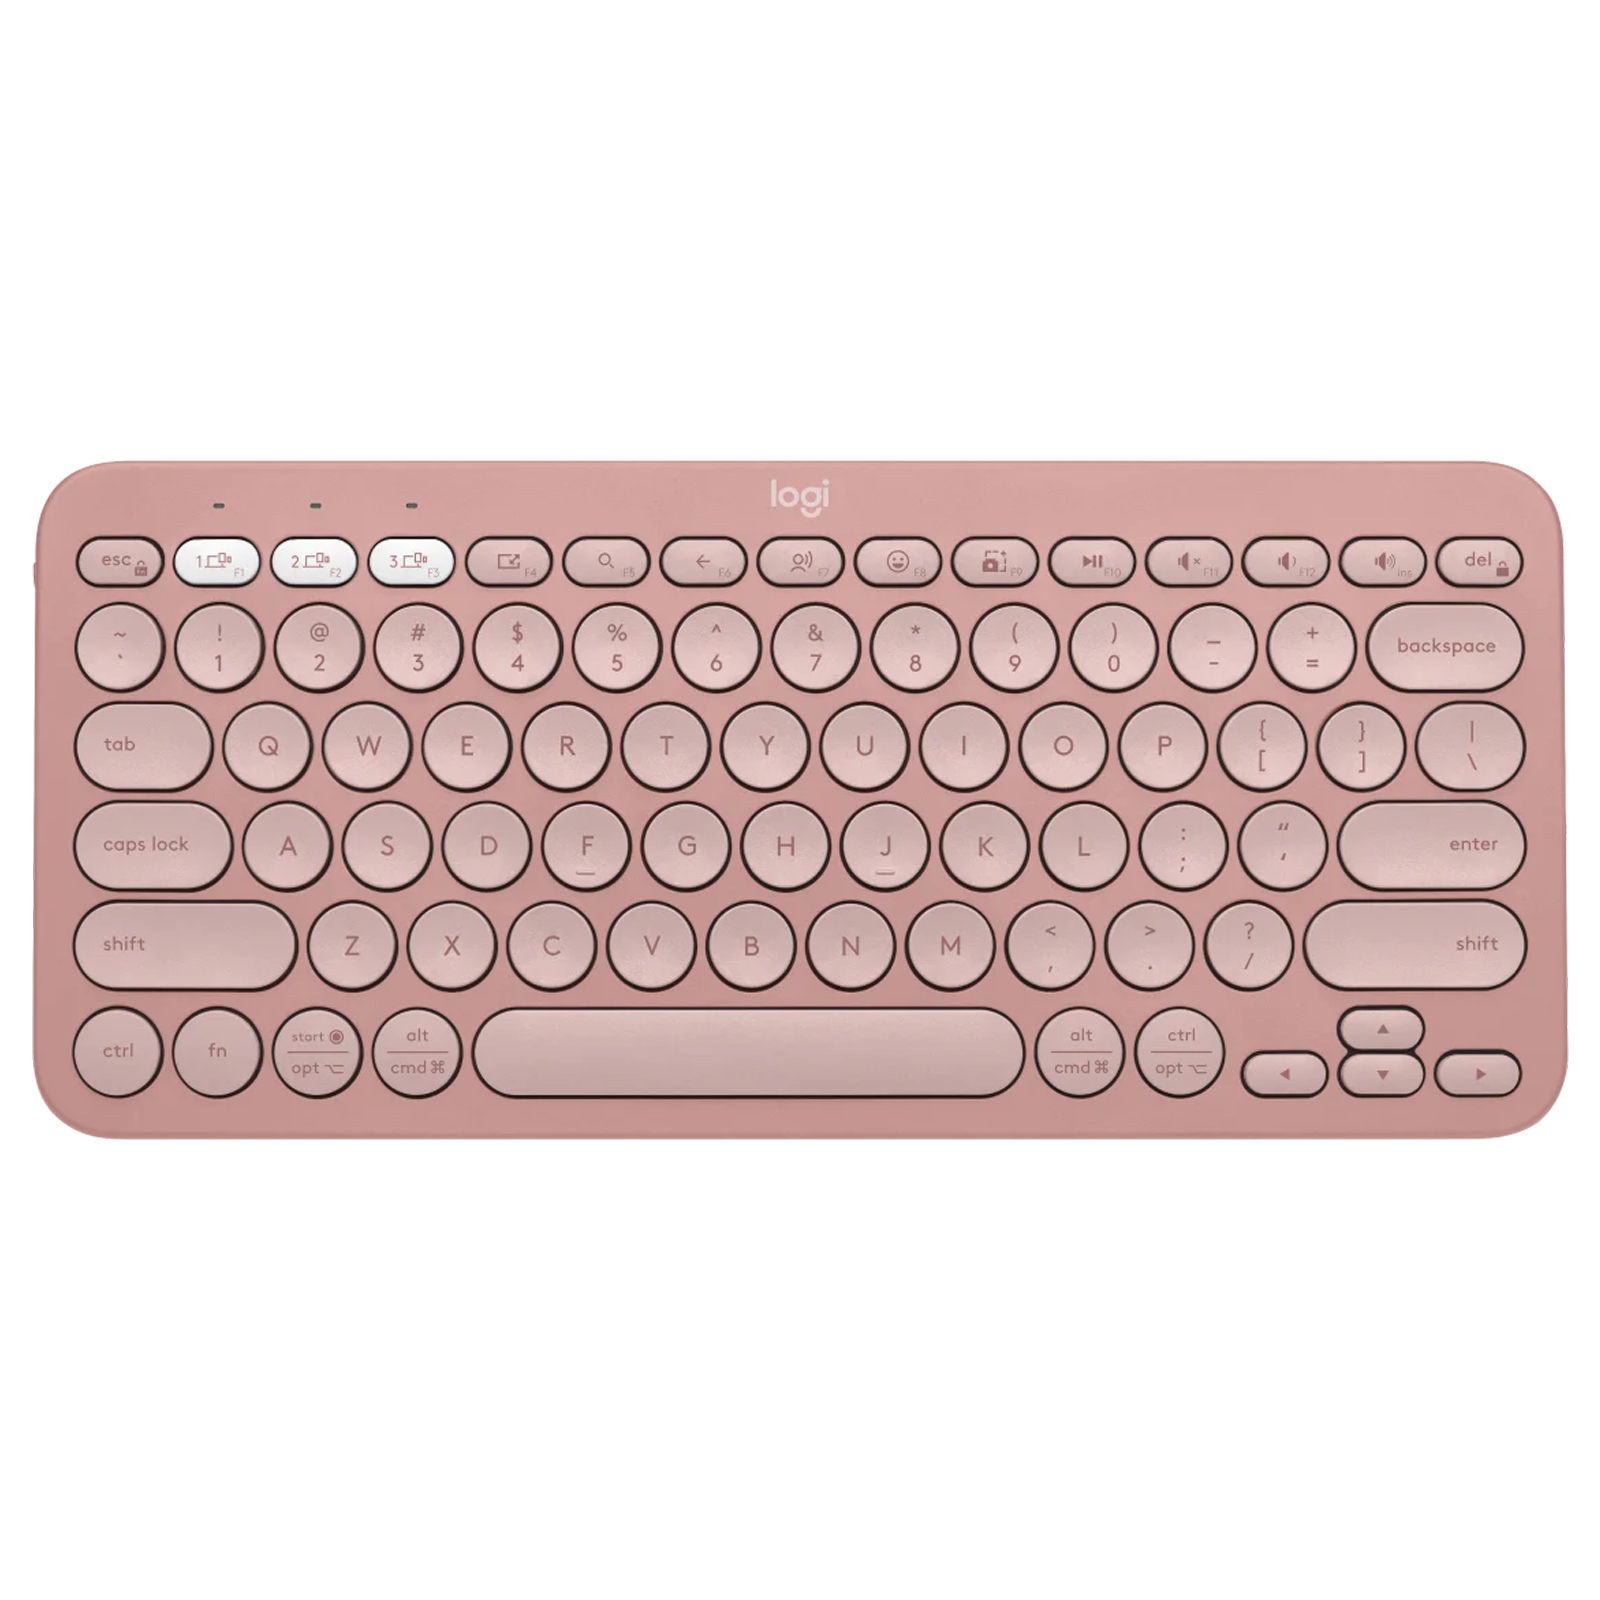 A Comprehensive Guide to Pairing Your Logitech Keyboard插图4